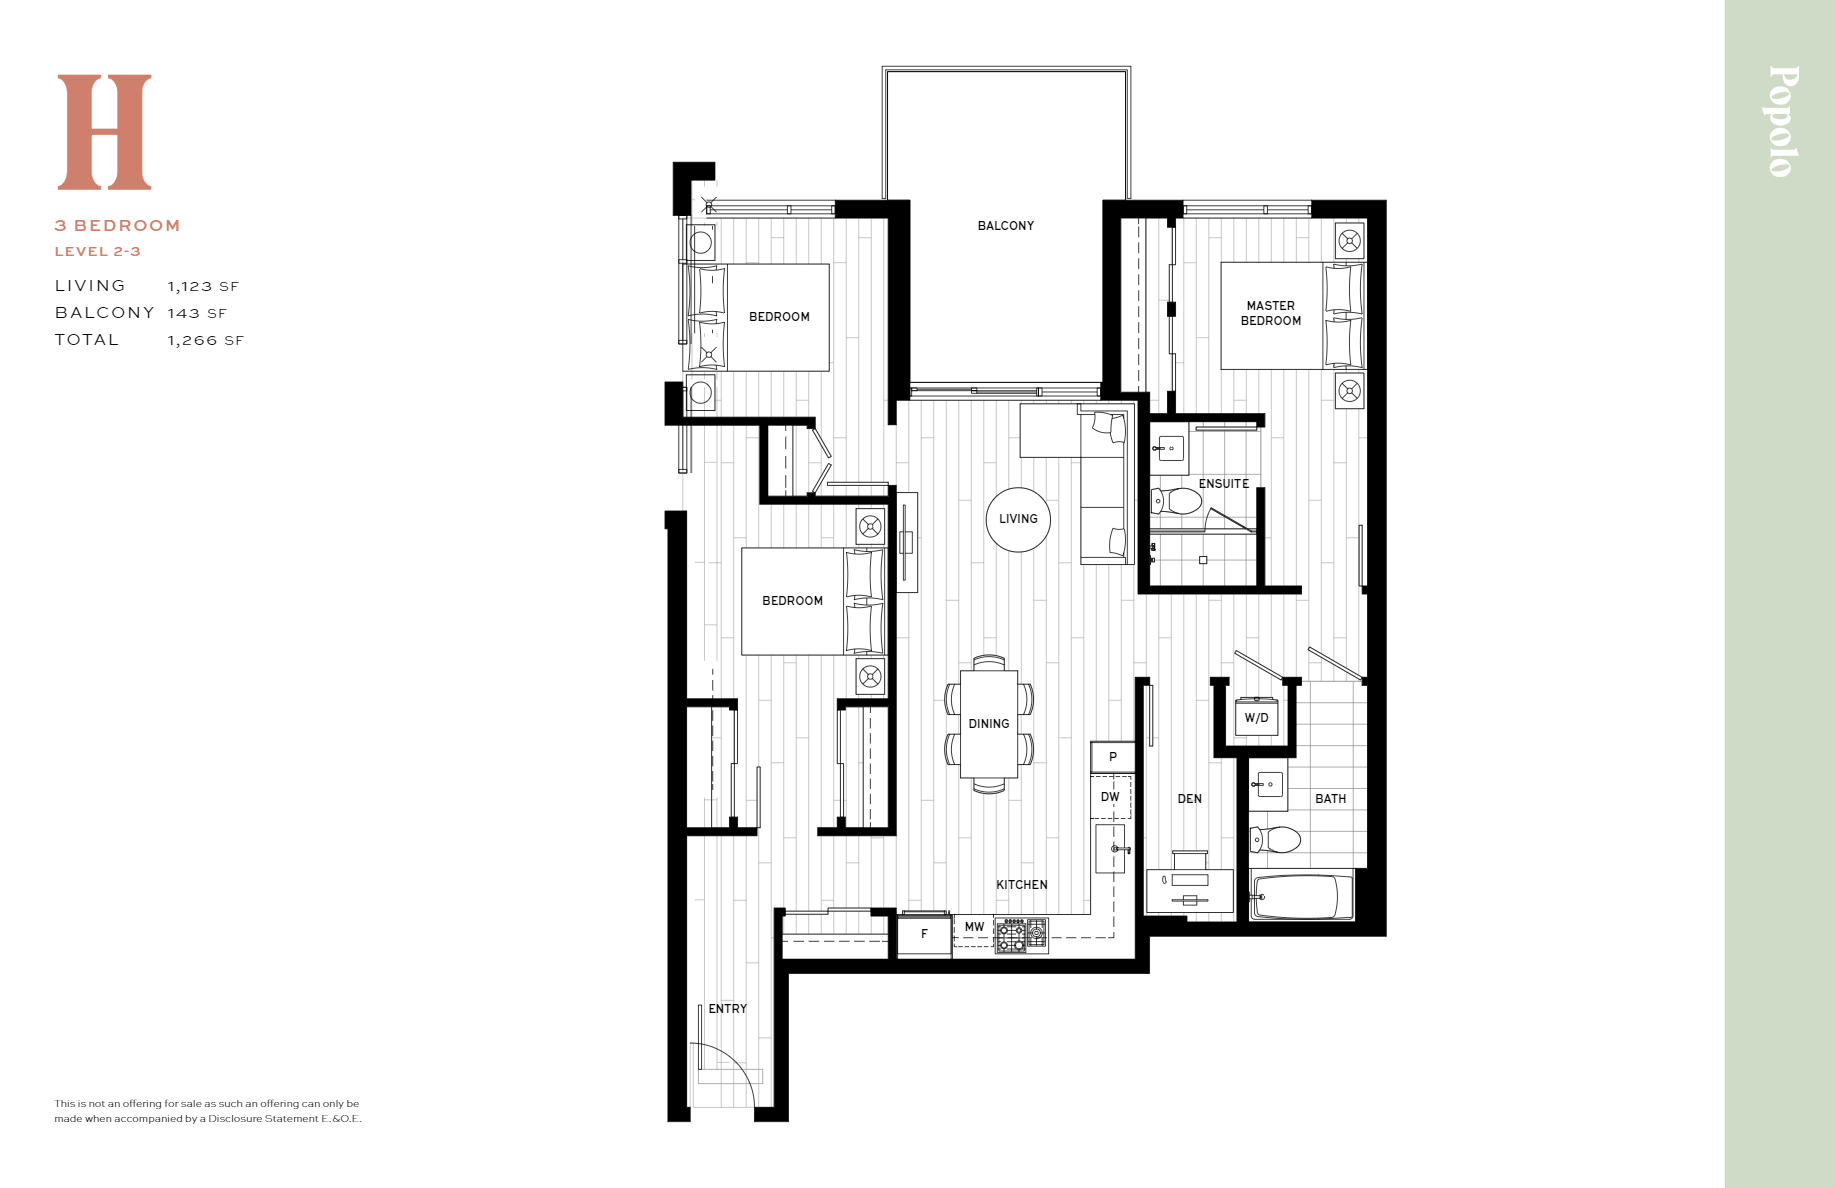 H Floor Plan of Popolo Condos with undefined beds